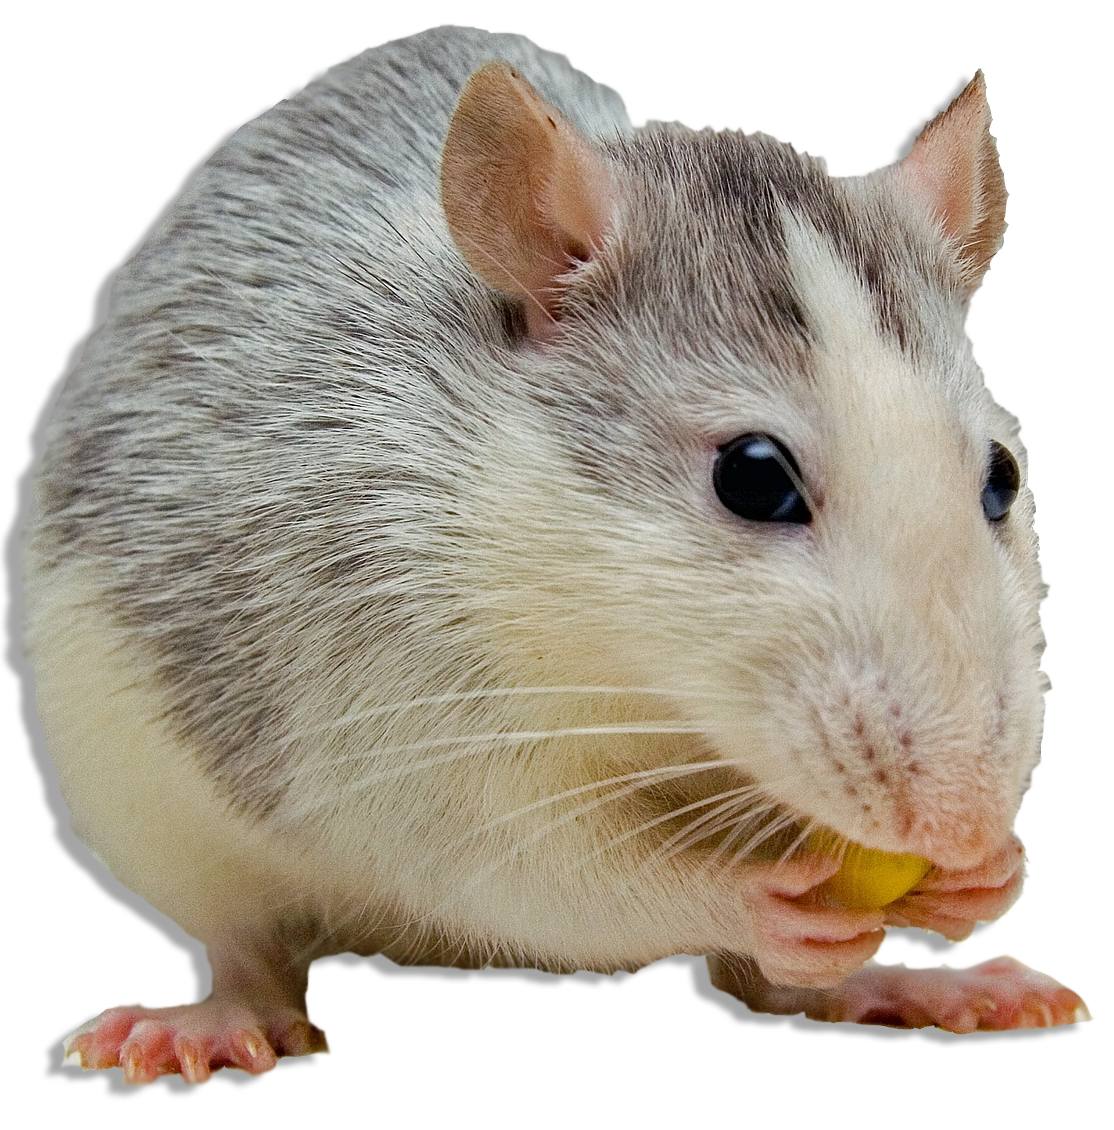 10 Easy Rodent Tips For Homeowners| Johnny B’s Pest Control